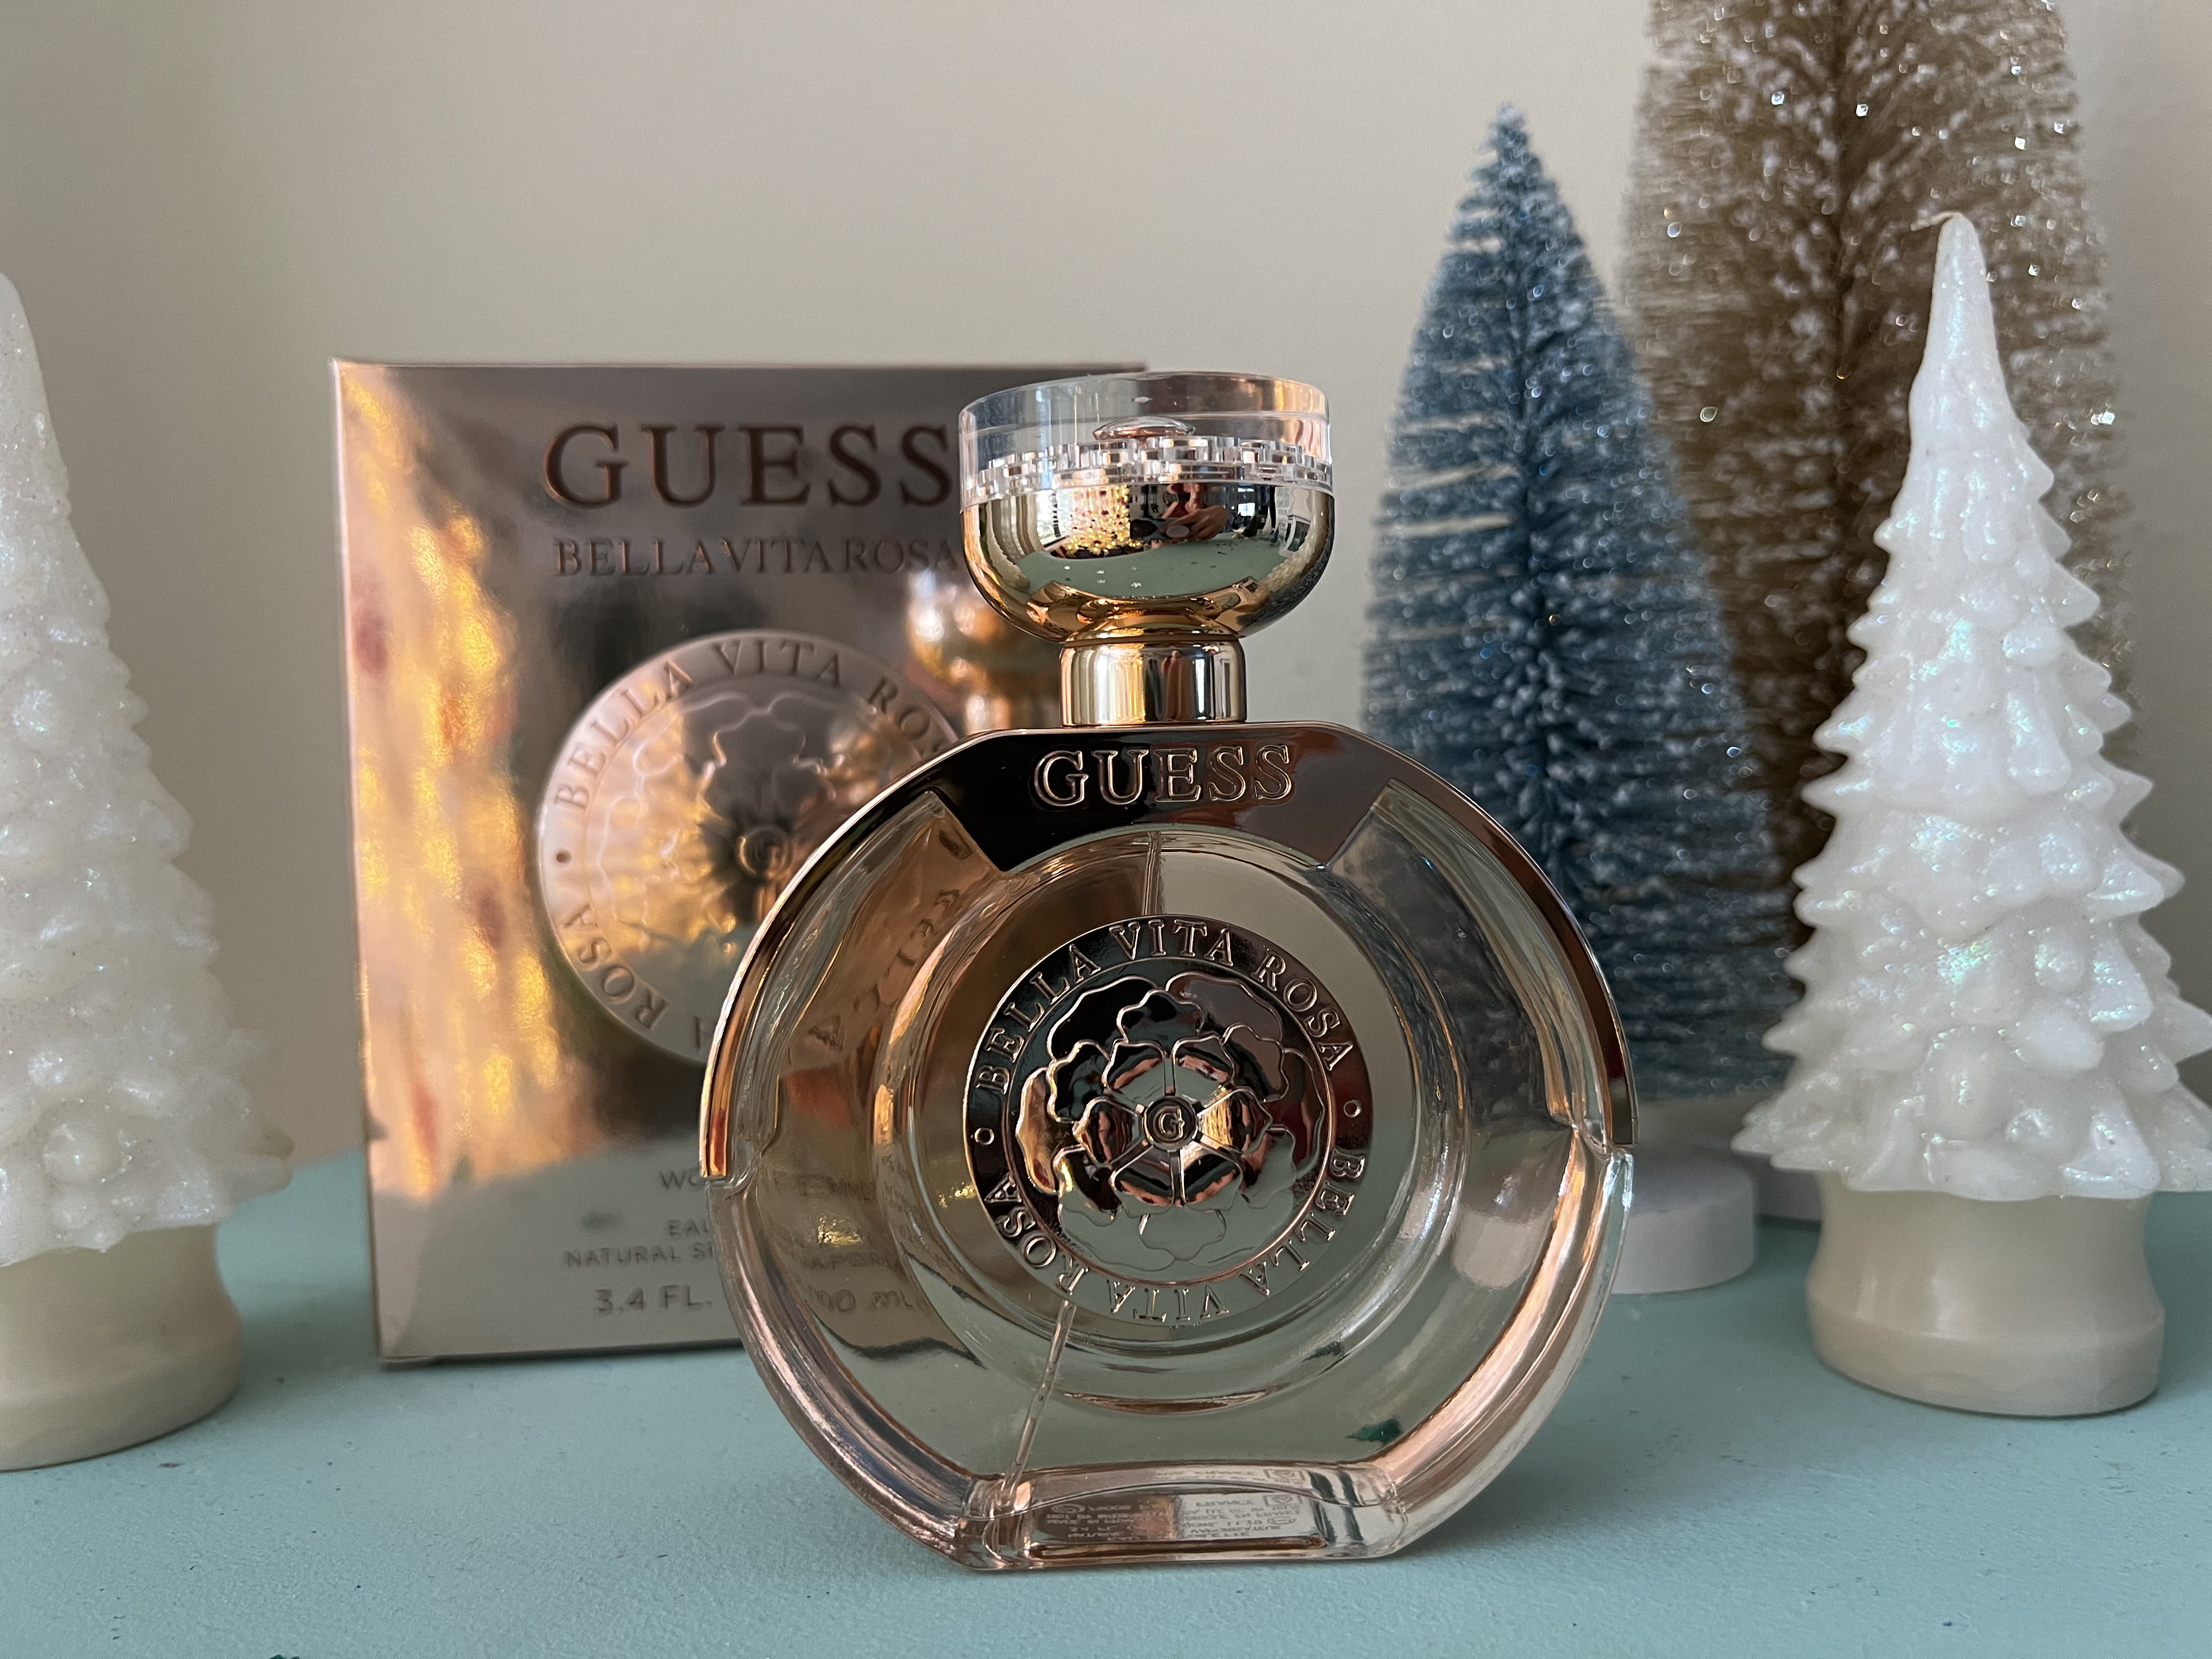 GUESS Bella Vita Rosa perfume - top gifts for her - Gift Guide best fragrance gifts for him and her